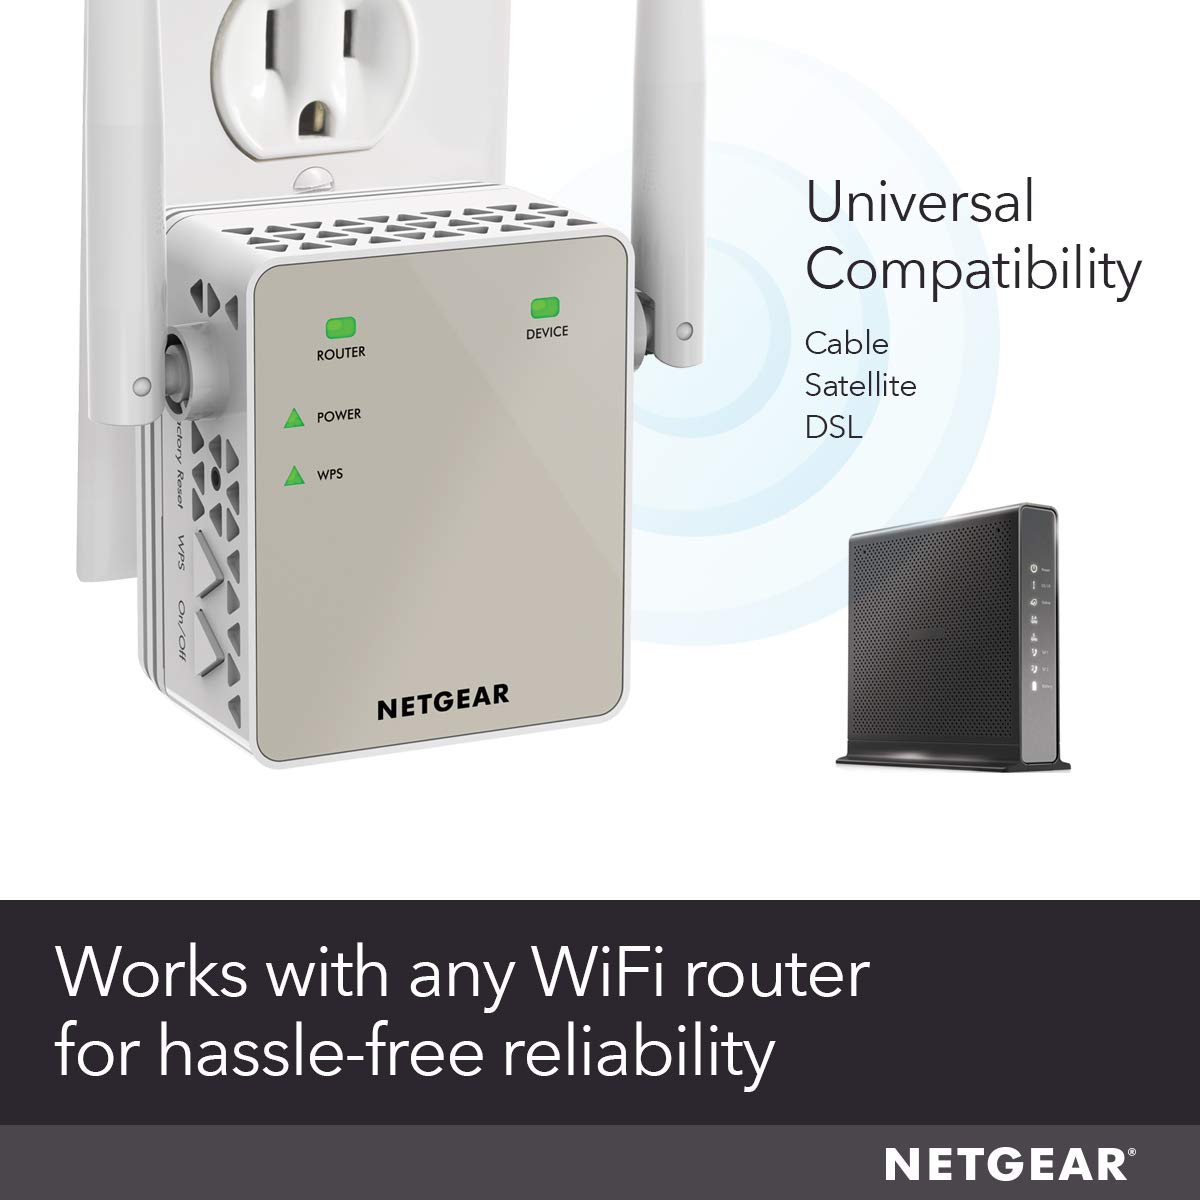 NETGEAR Wi-Fi Range Extender EX6120 - Coverage Up to 1500 Sq Ft and 25 Devices with AC1200 Dual Band Wireless Signal Booster & Repeater (Up to 1200Mbps Speed), and Compact Wall Plug Design, White